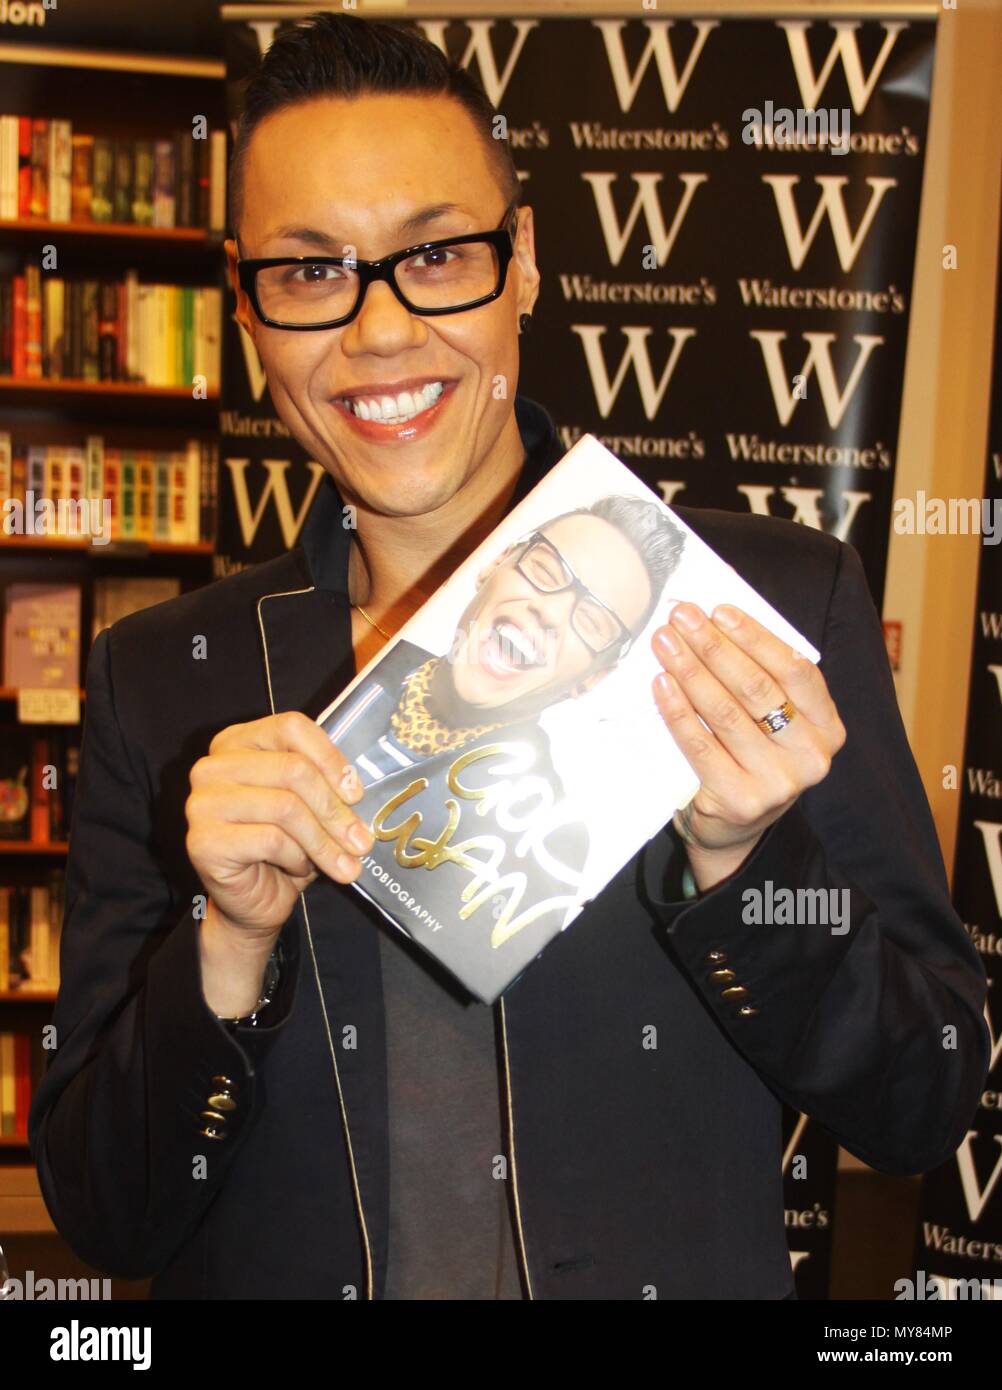 Liverpool,Uk, Gok Wan signs copies of his autobiography in waterstones liverpool one, credit Ian Fairbrother/Alamy Stock Photos Stock Photo